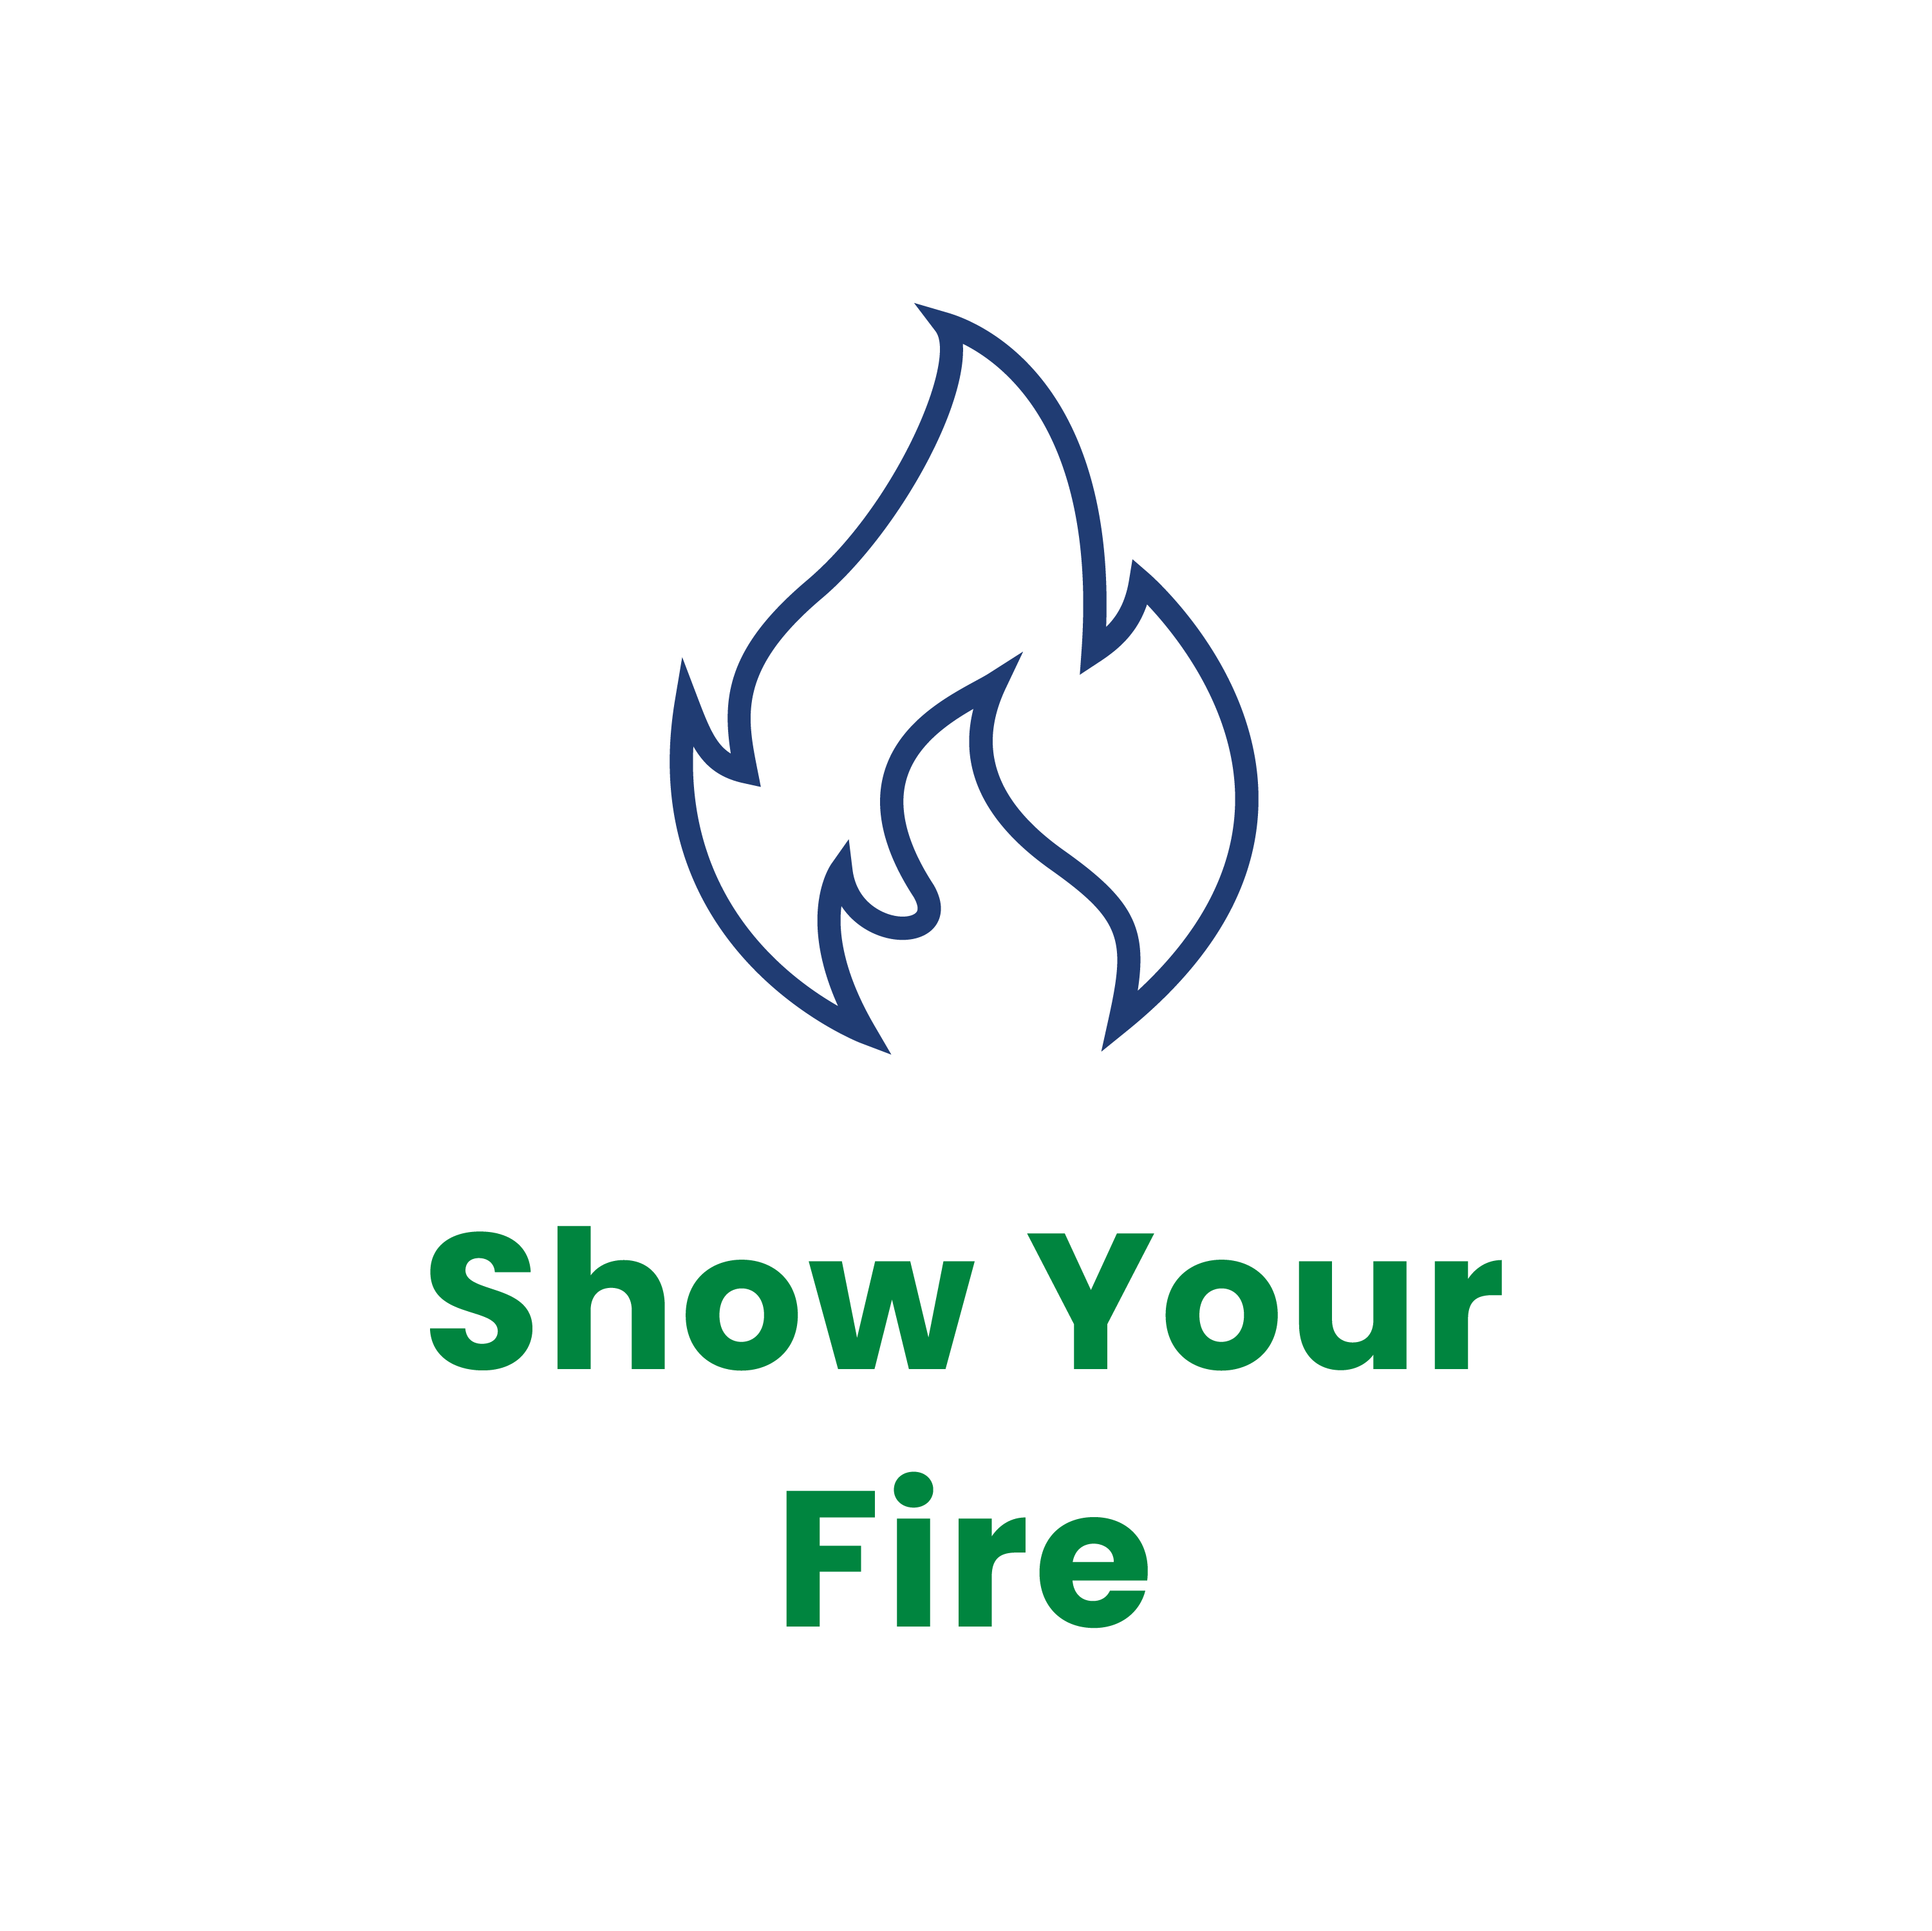 Show Your Fire